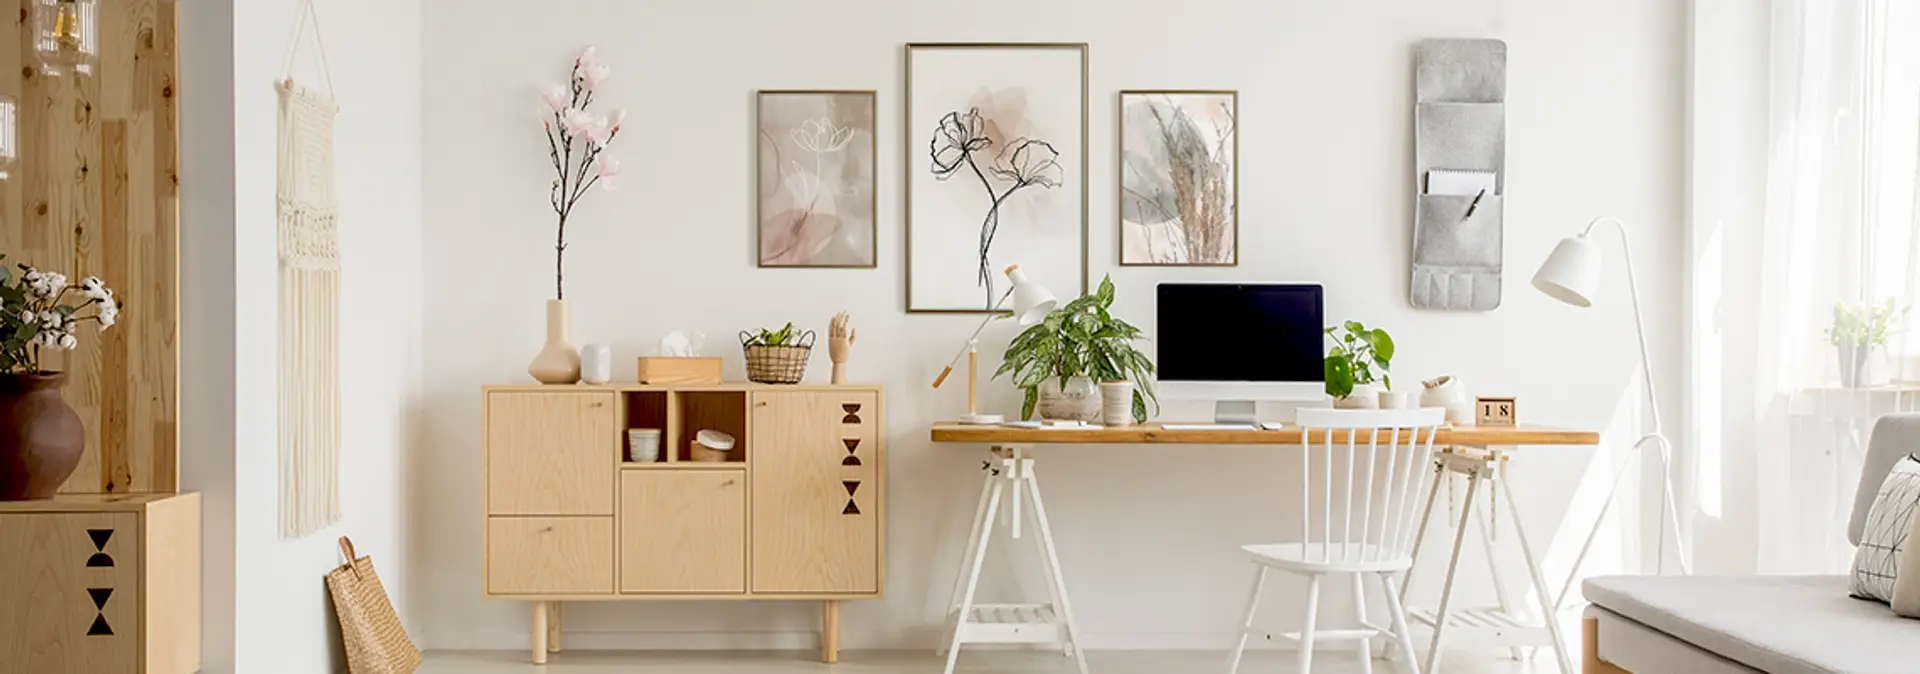 home office inspirations